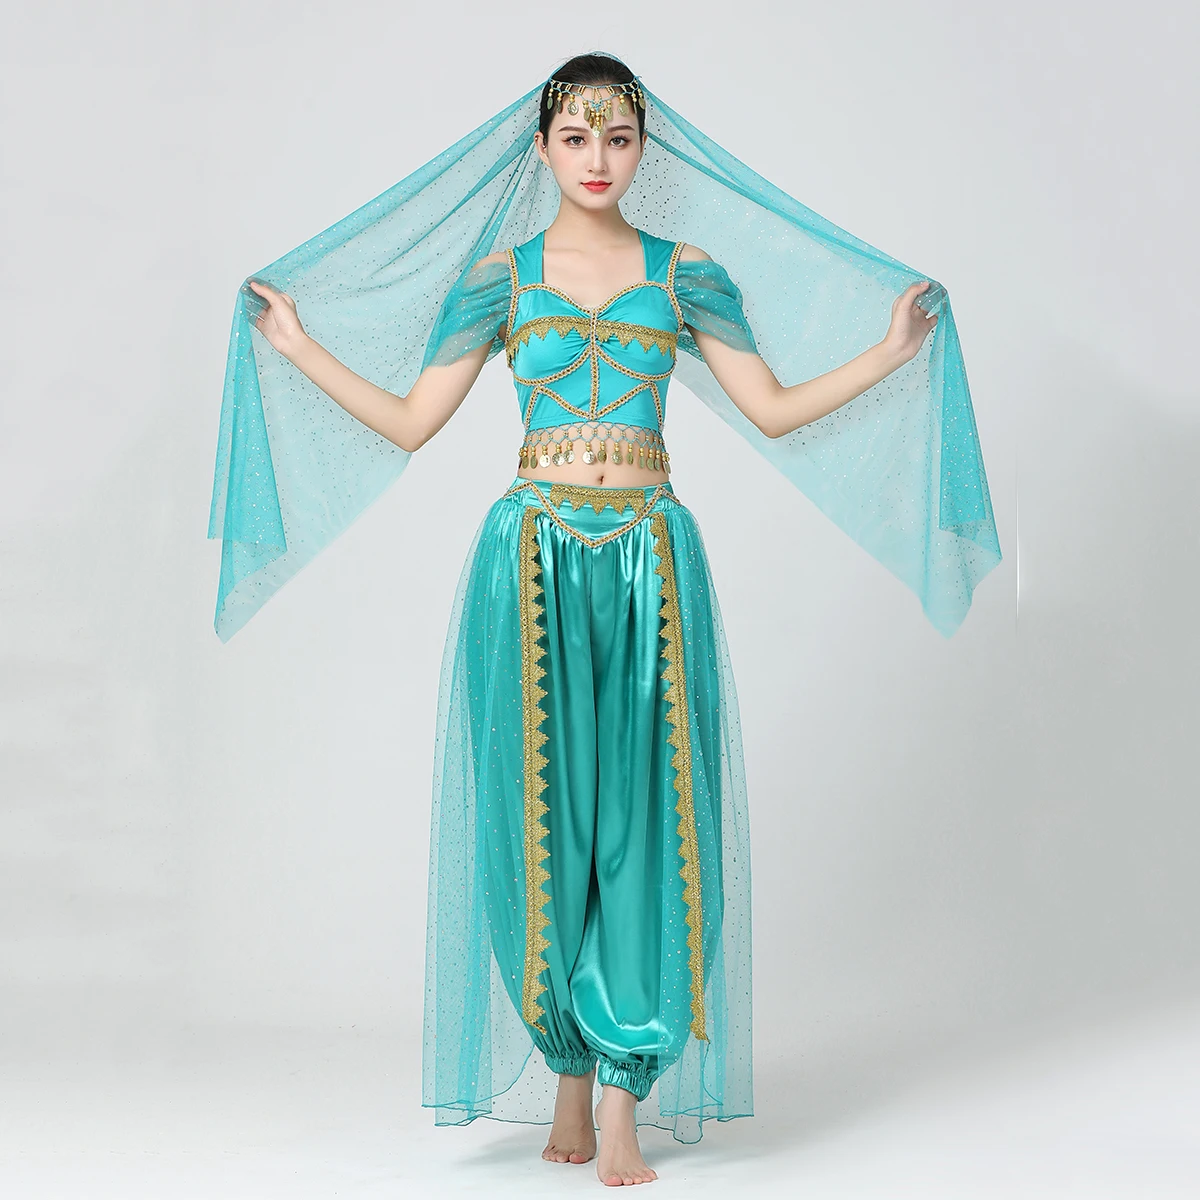 Princess Jasmine Costume India Belly Dance Arabian Dress Party Christmas Halloween Cosplay Outfit Blue